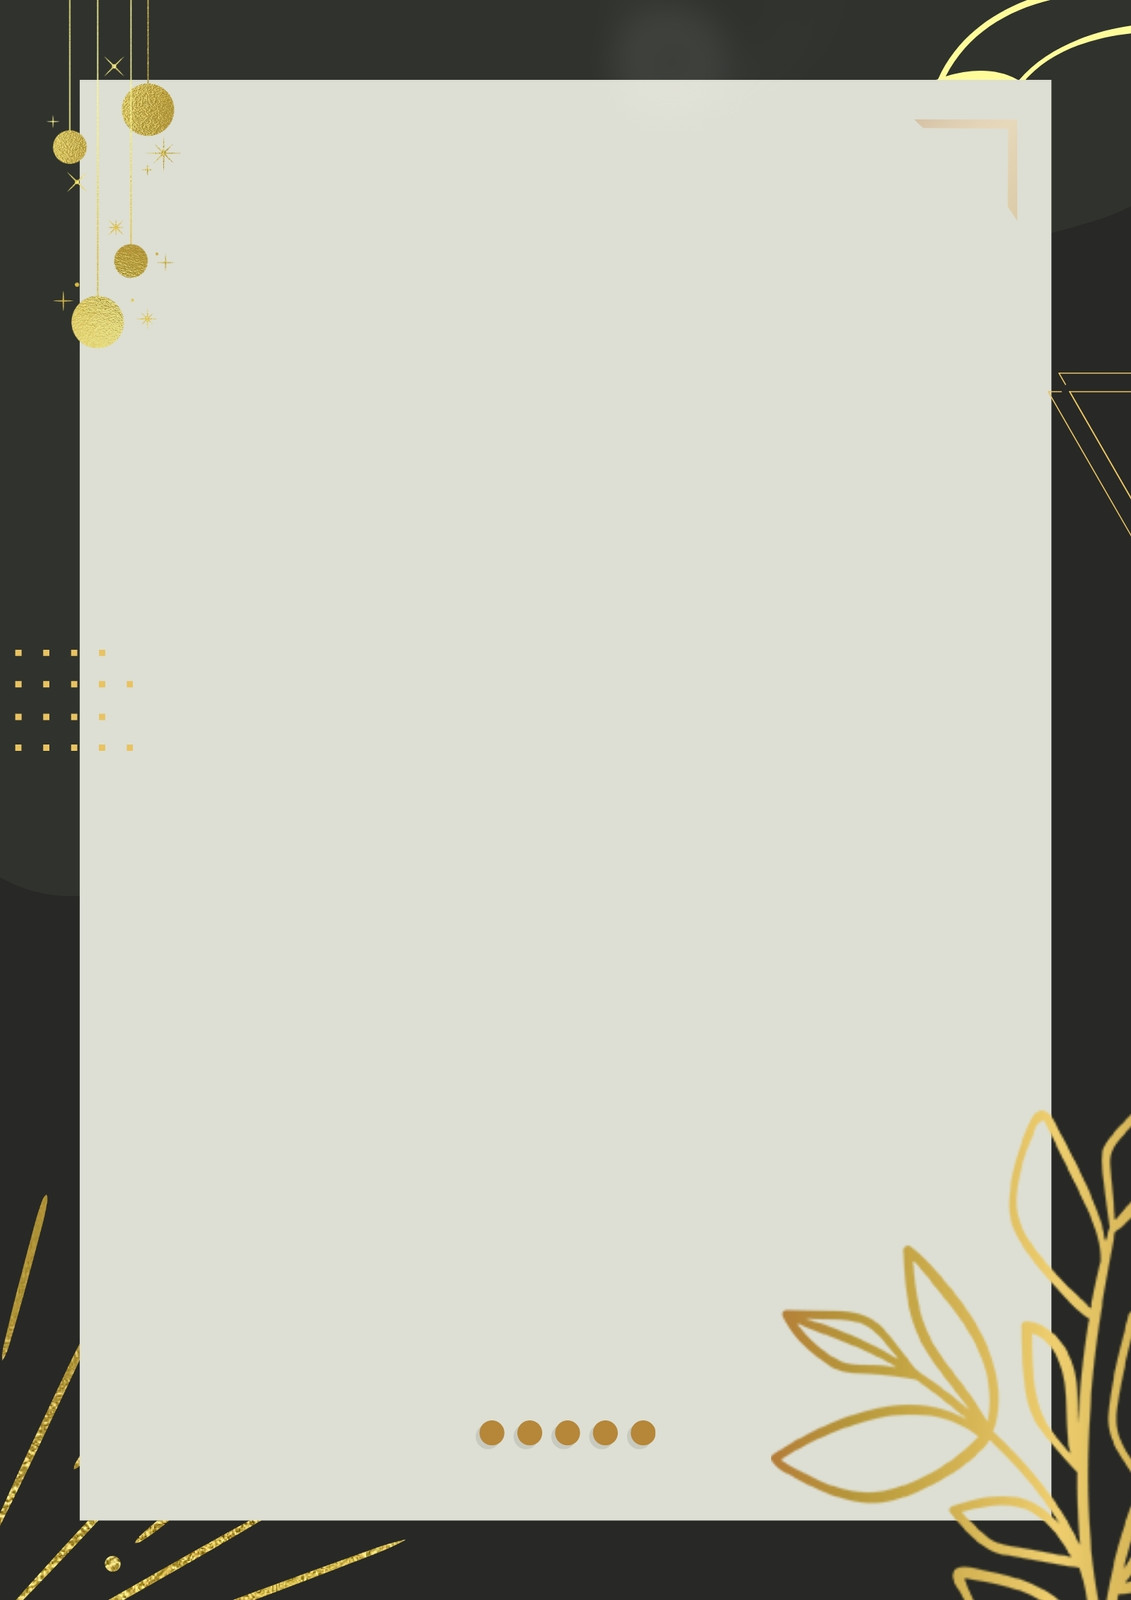 gold scroll page borders